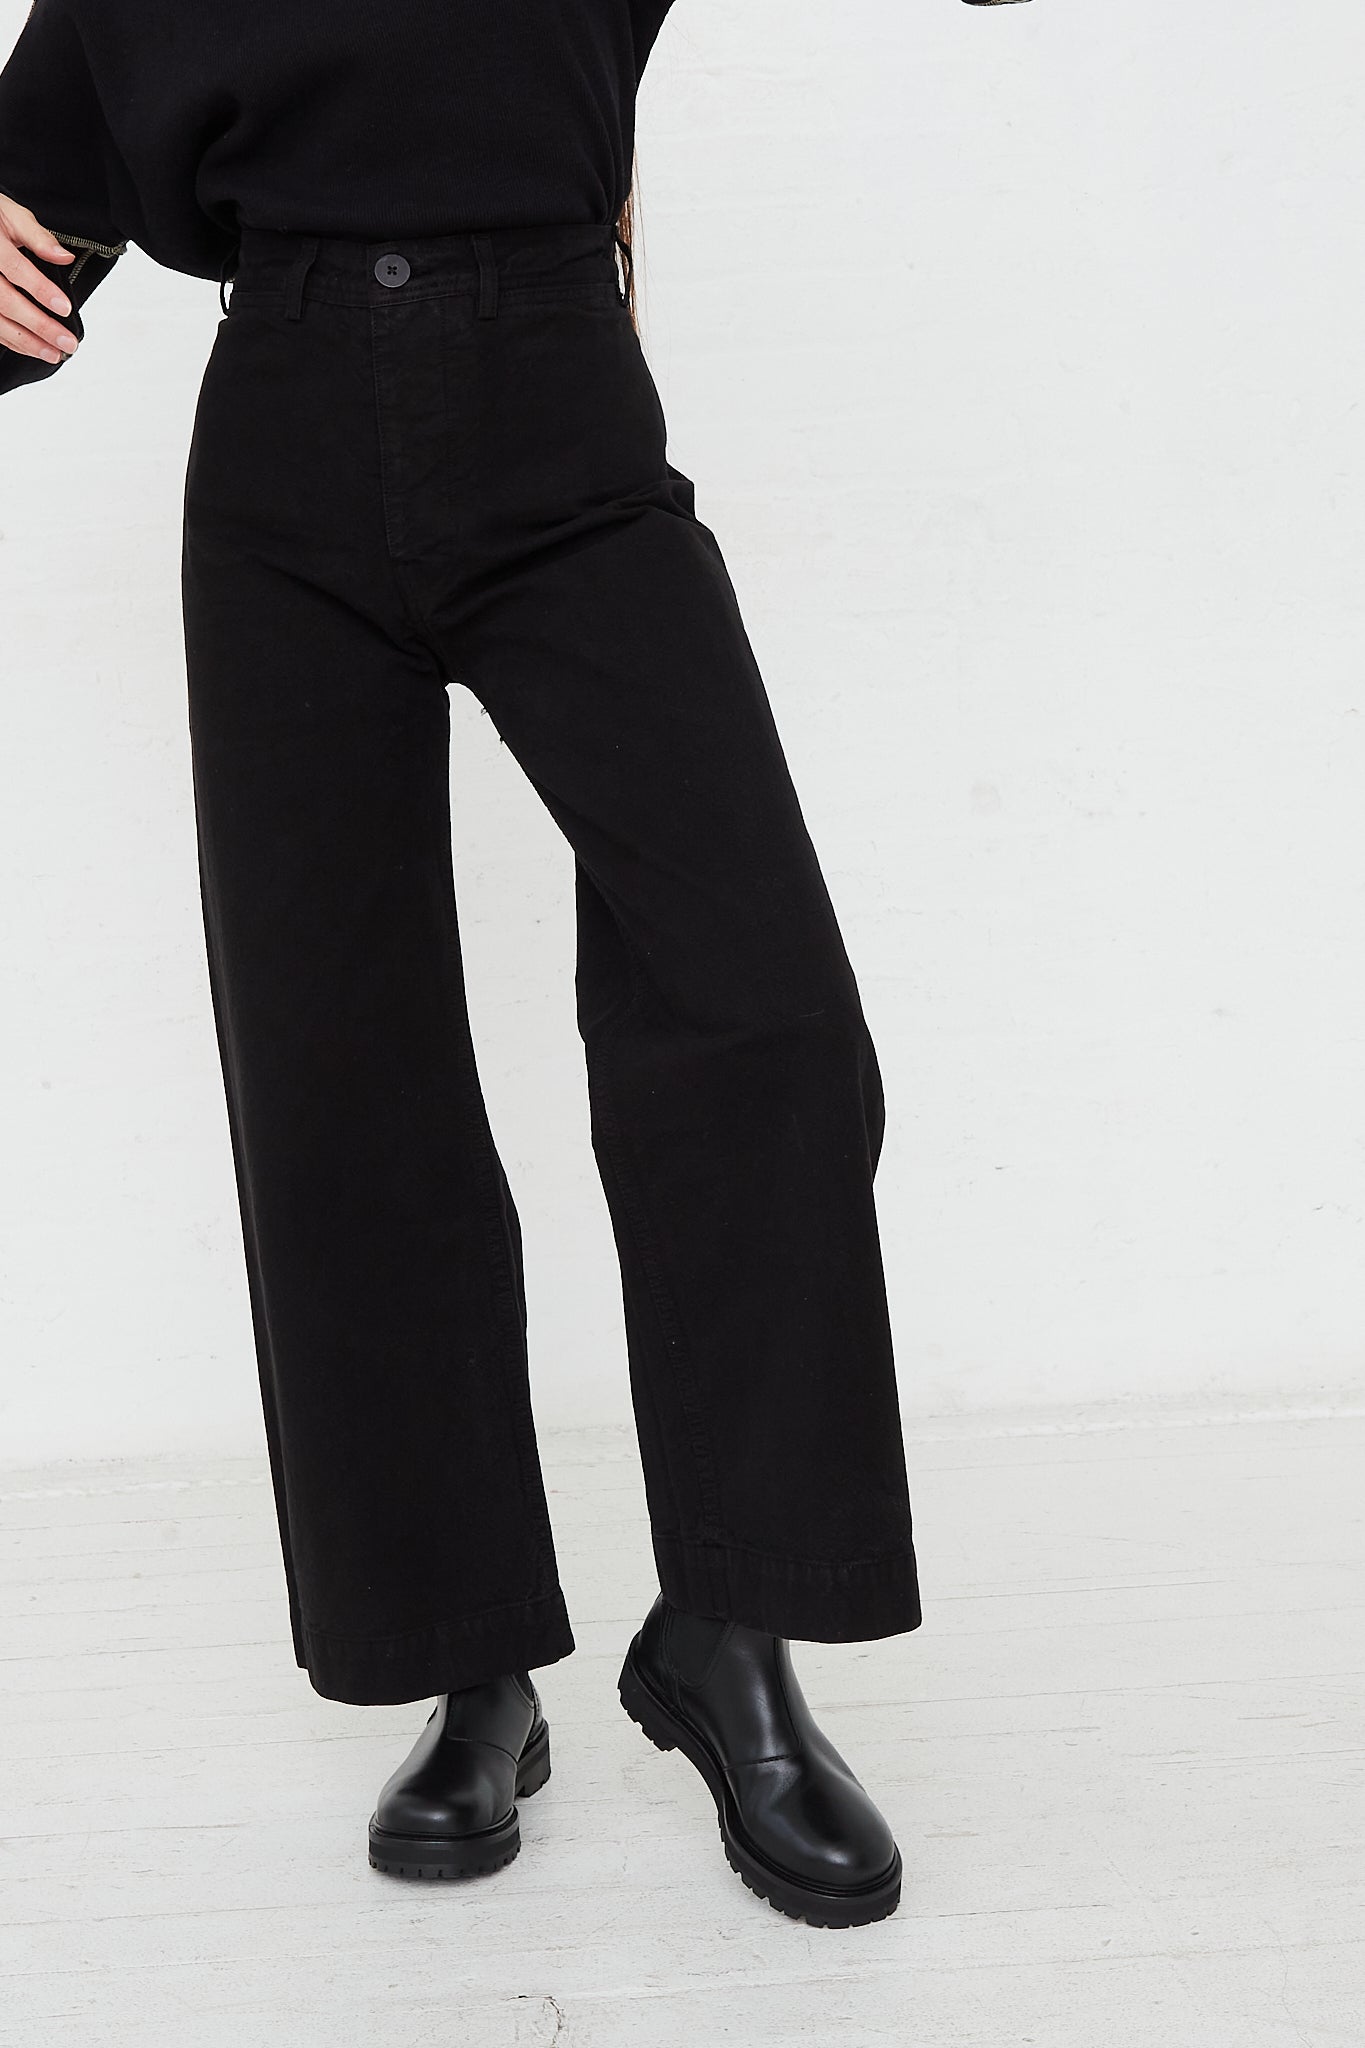 Organic Cotton Canvas Sailor Pant in Black by Jesse Kamm for Oroboro Front